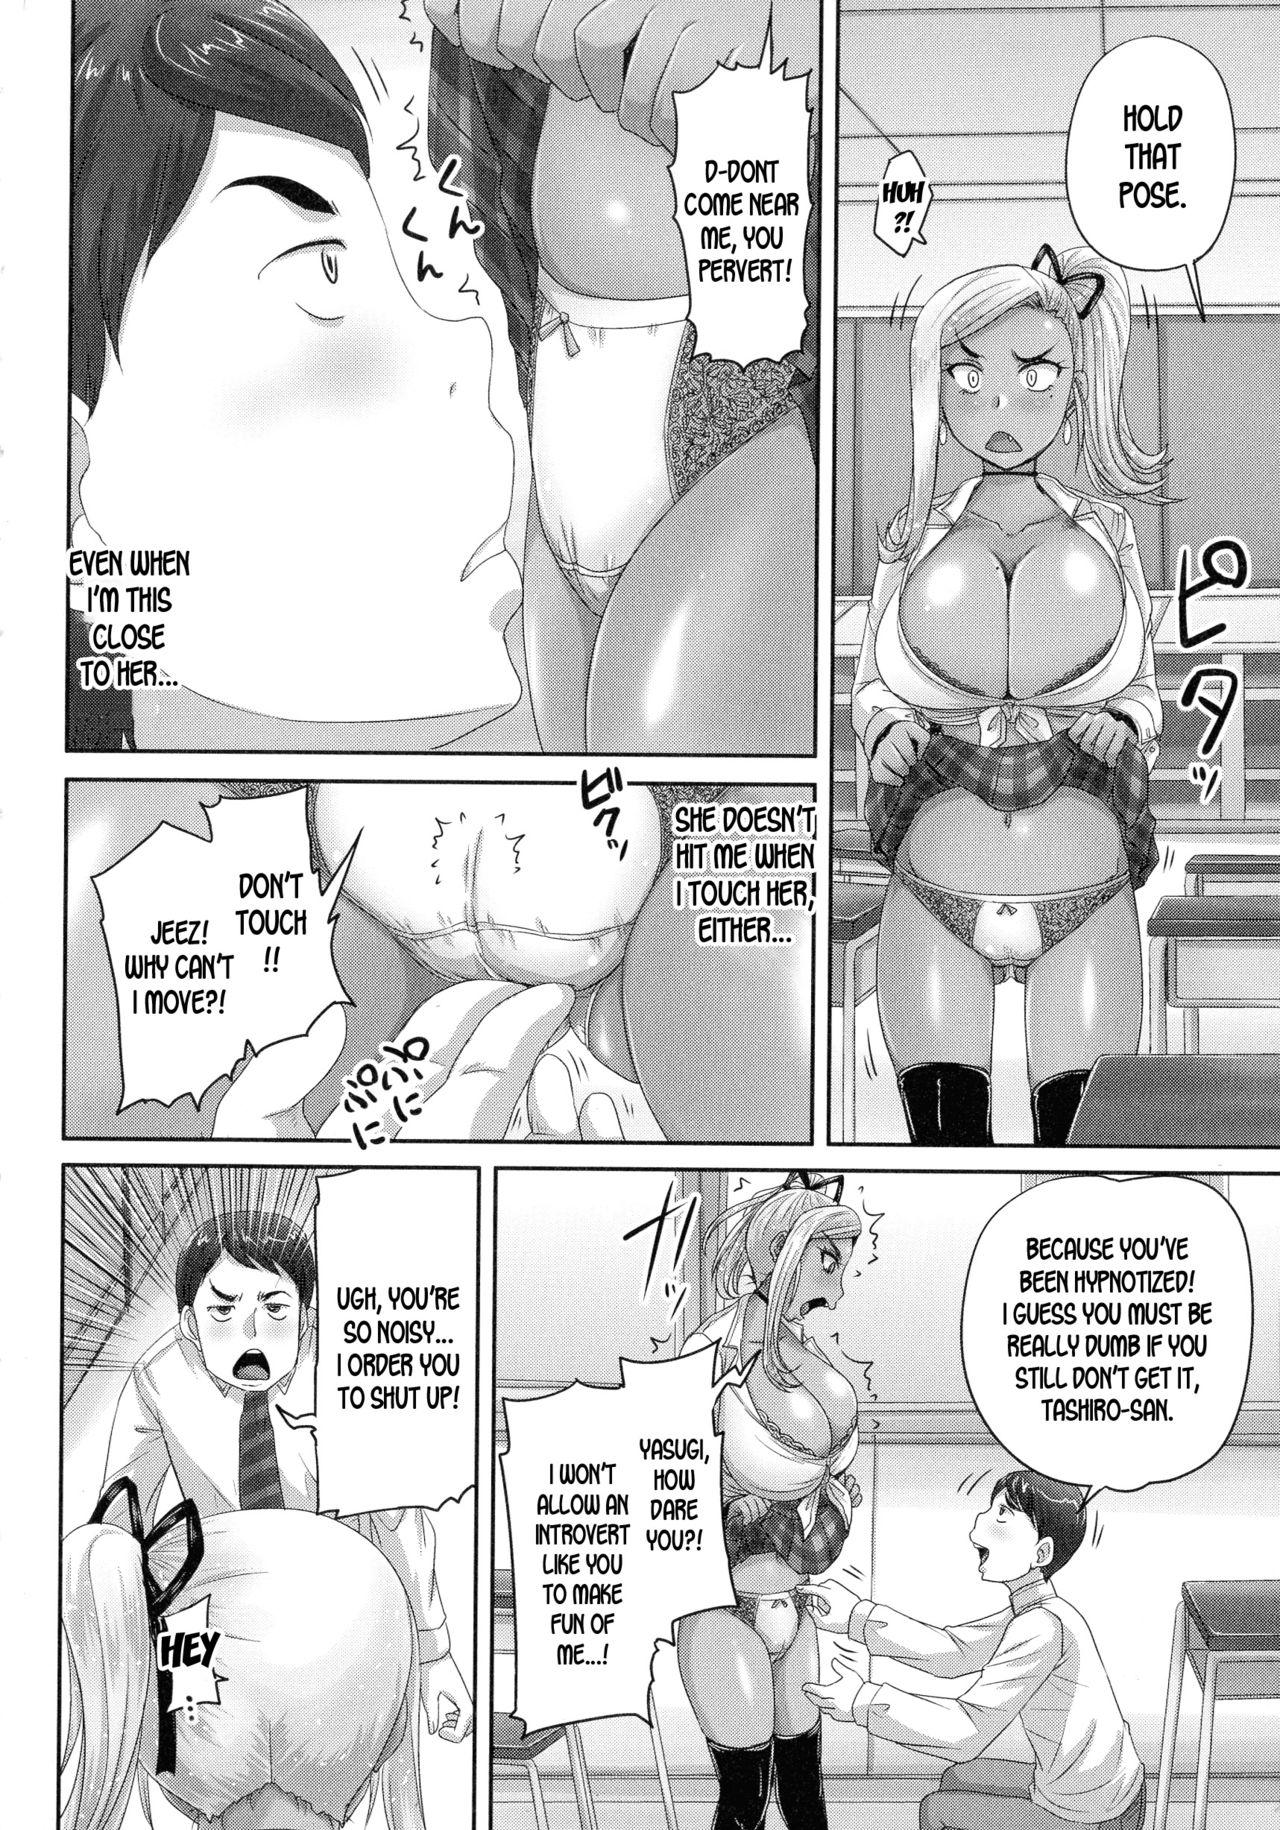 Spy Cam Be Careful of Trial Hypnosis! Chilena - Page 6